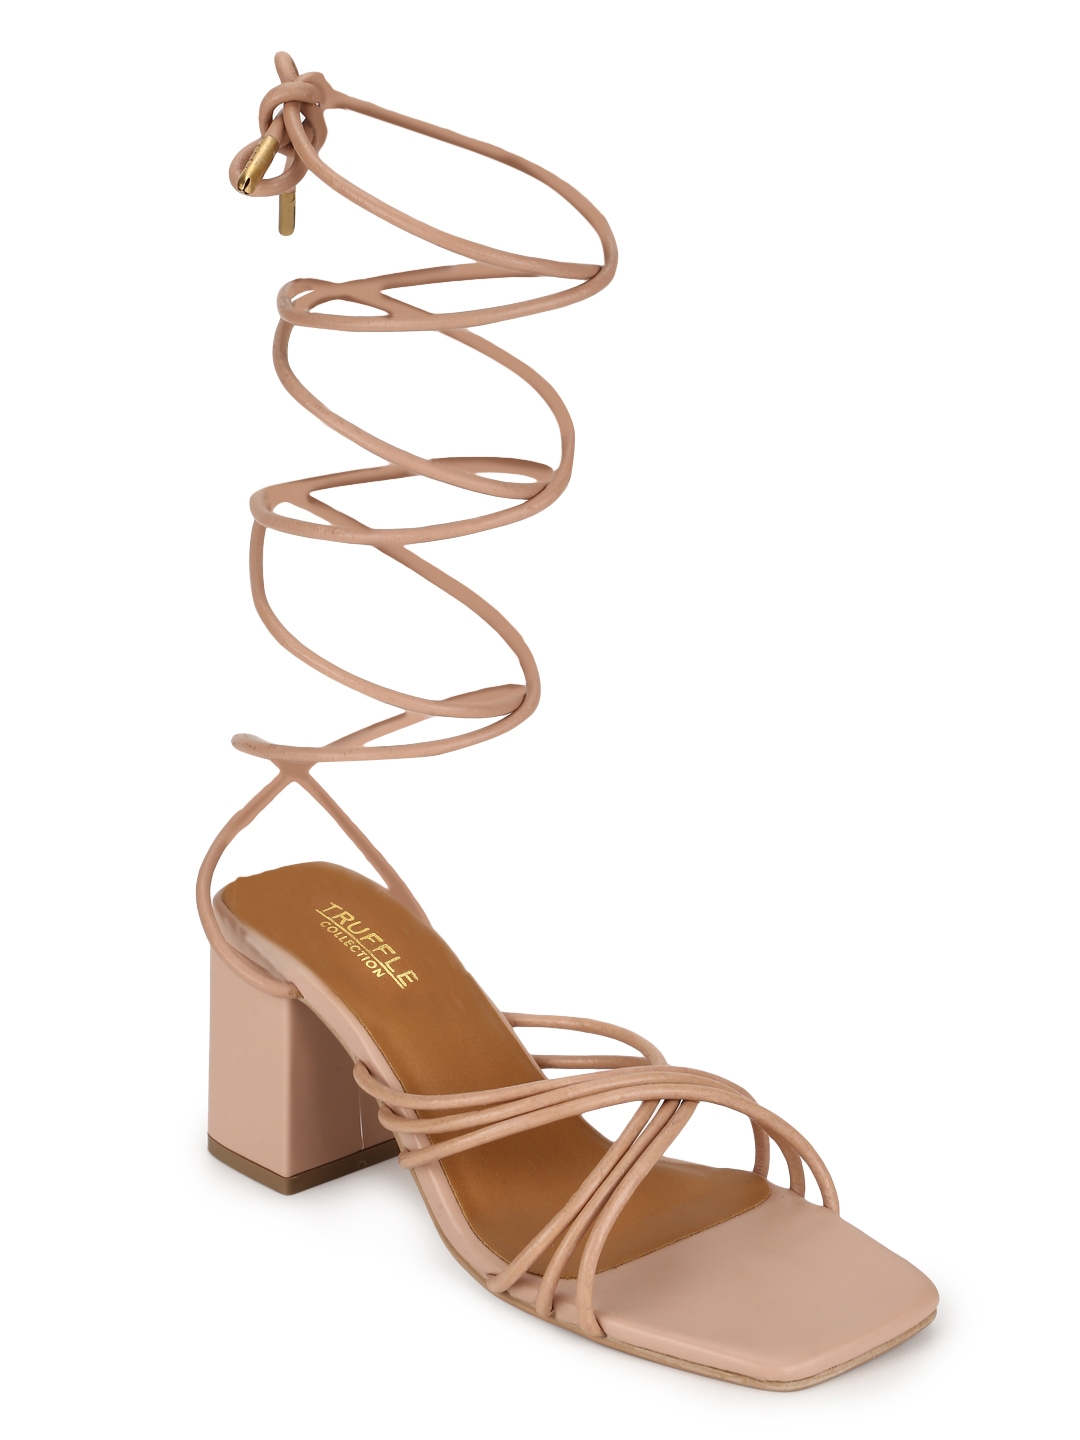 Truffle Collection | Nude PU Strappy Block Heel Sandals